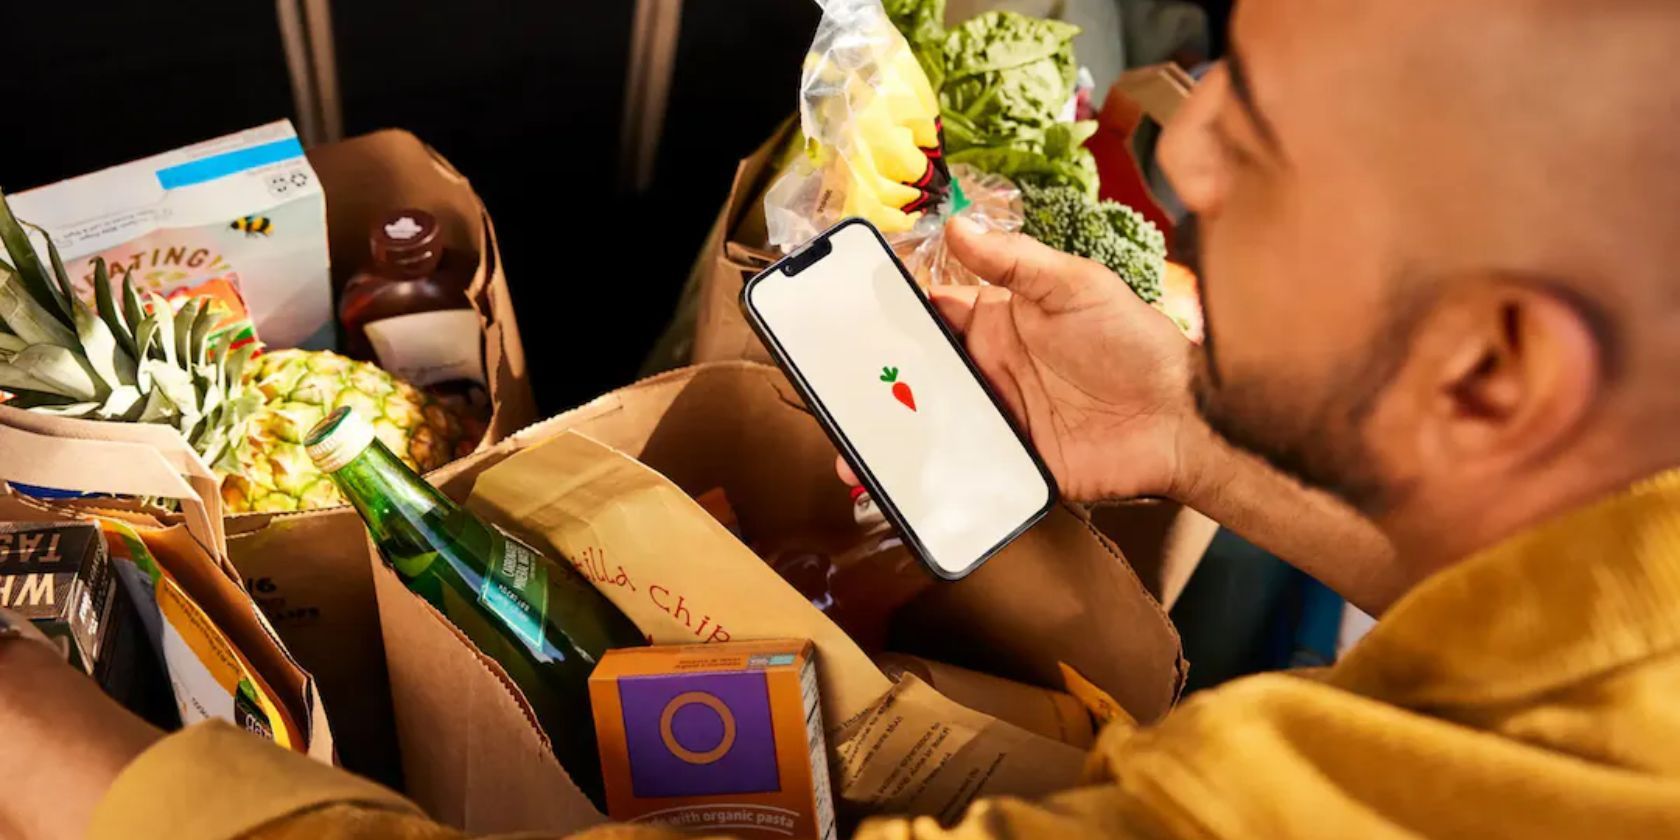 Man inspecting groceries from Instacart